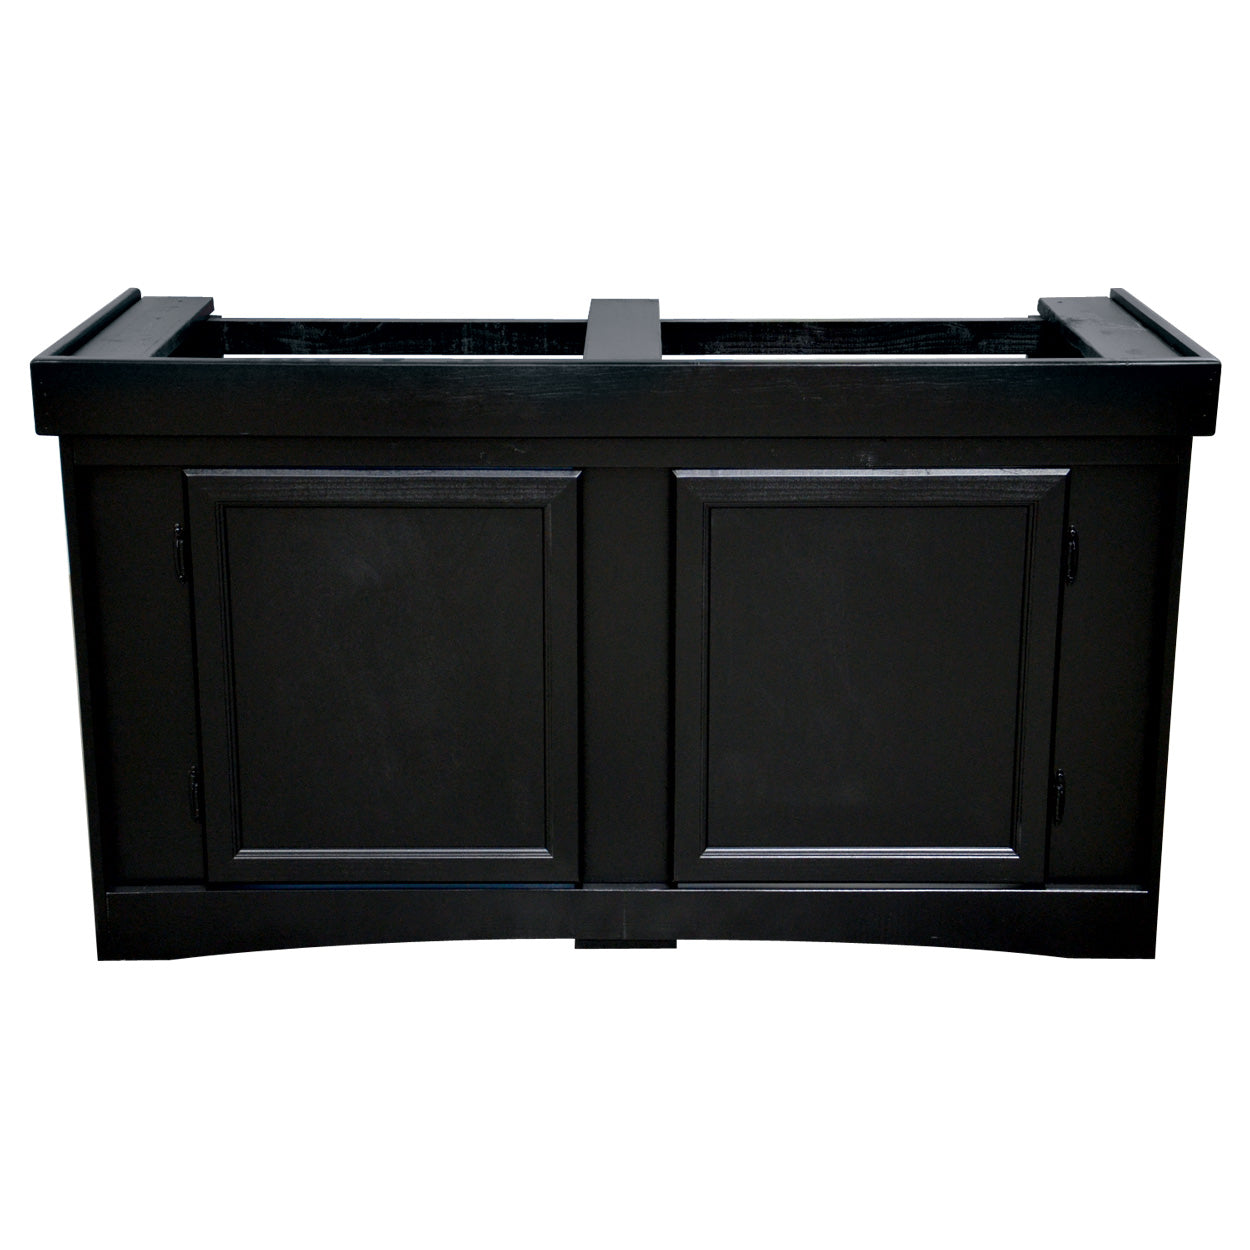 Monarch Cabinet Stand - Black- All sizes Available